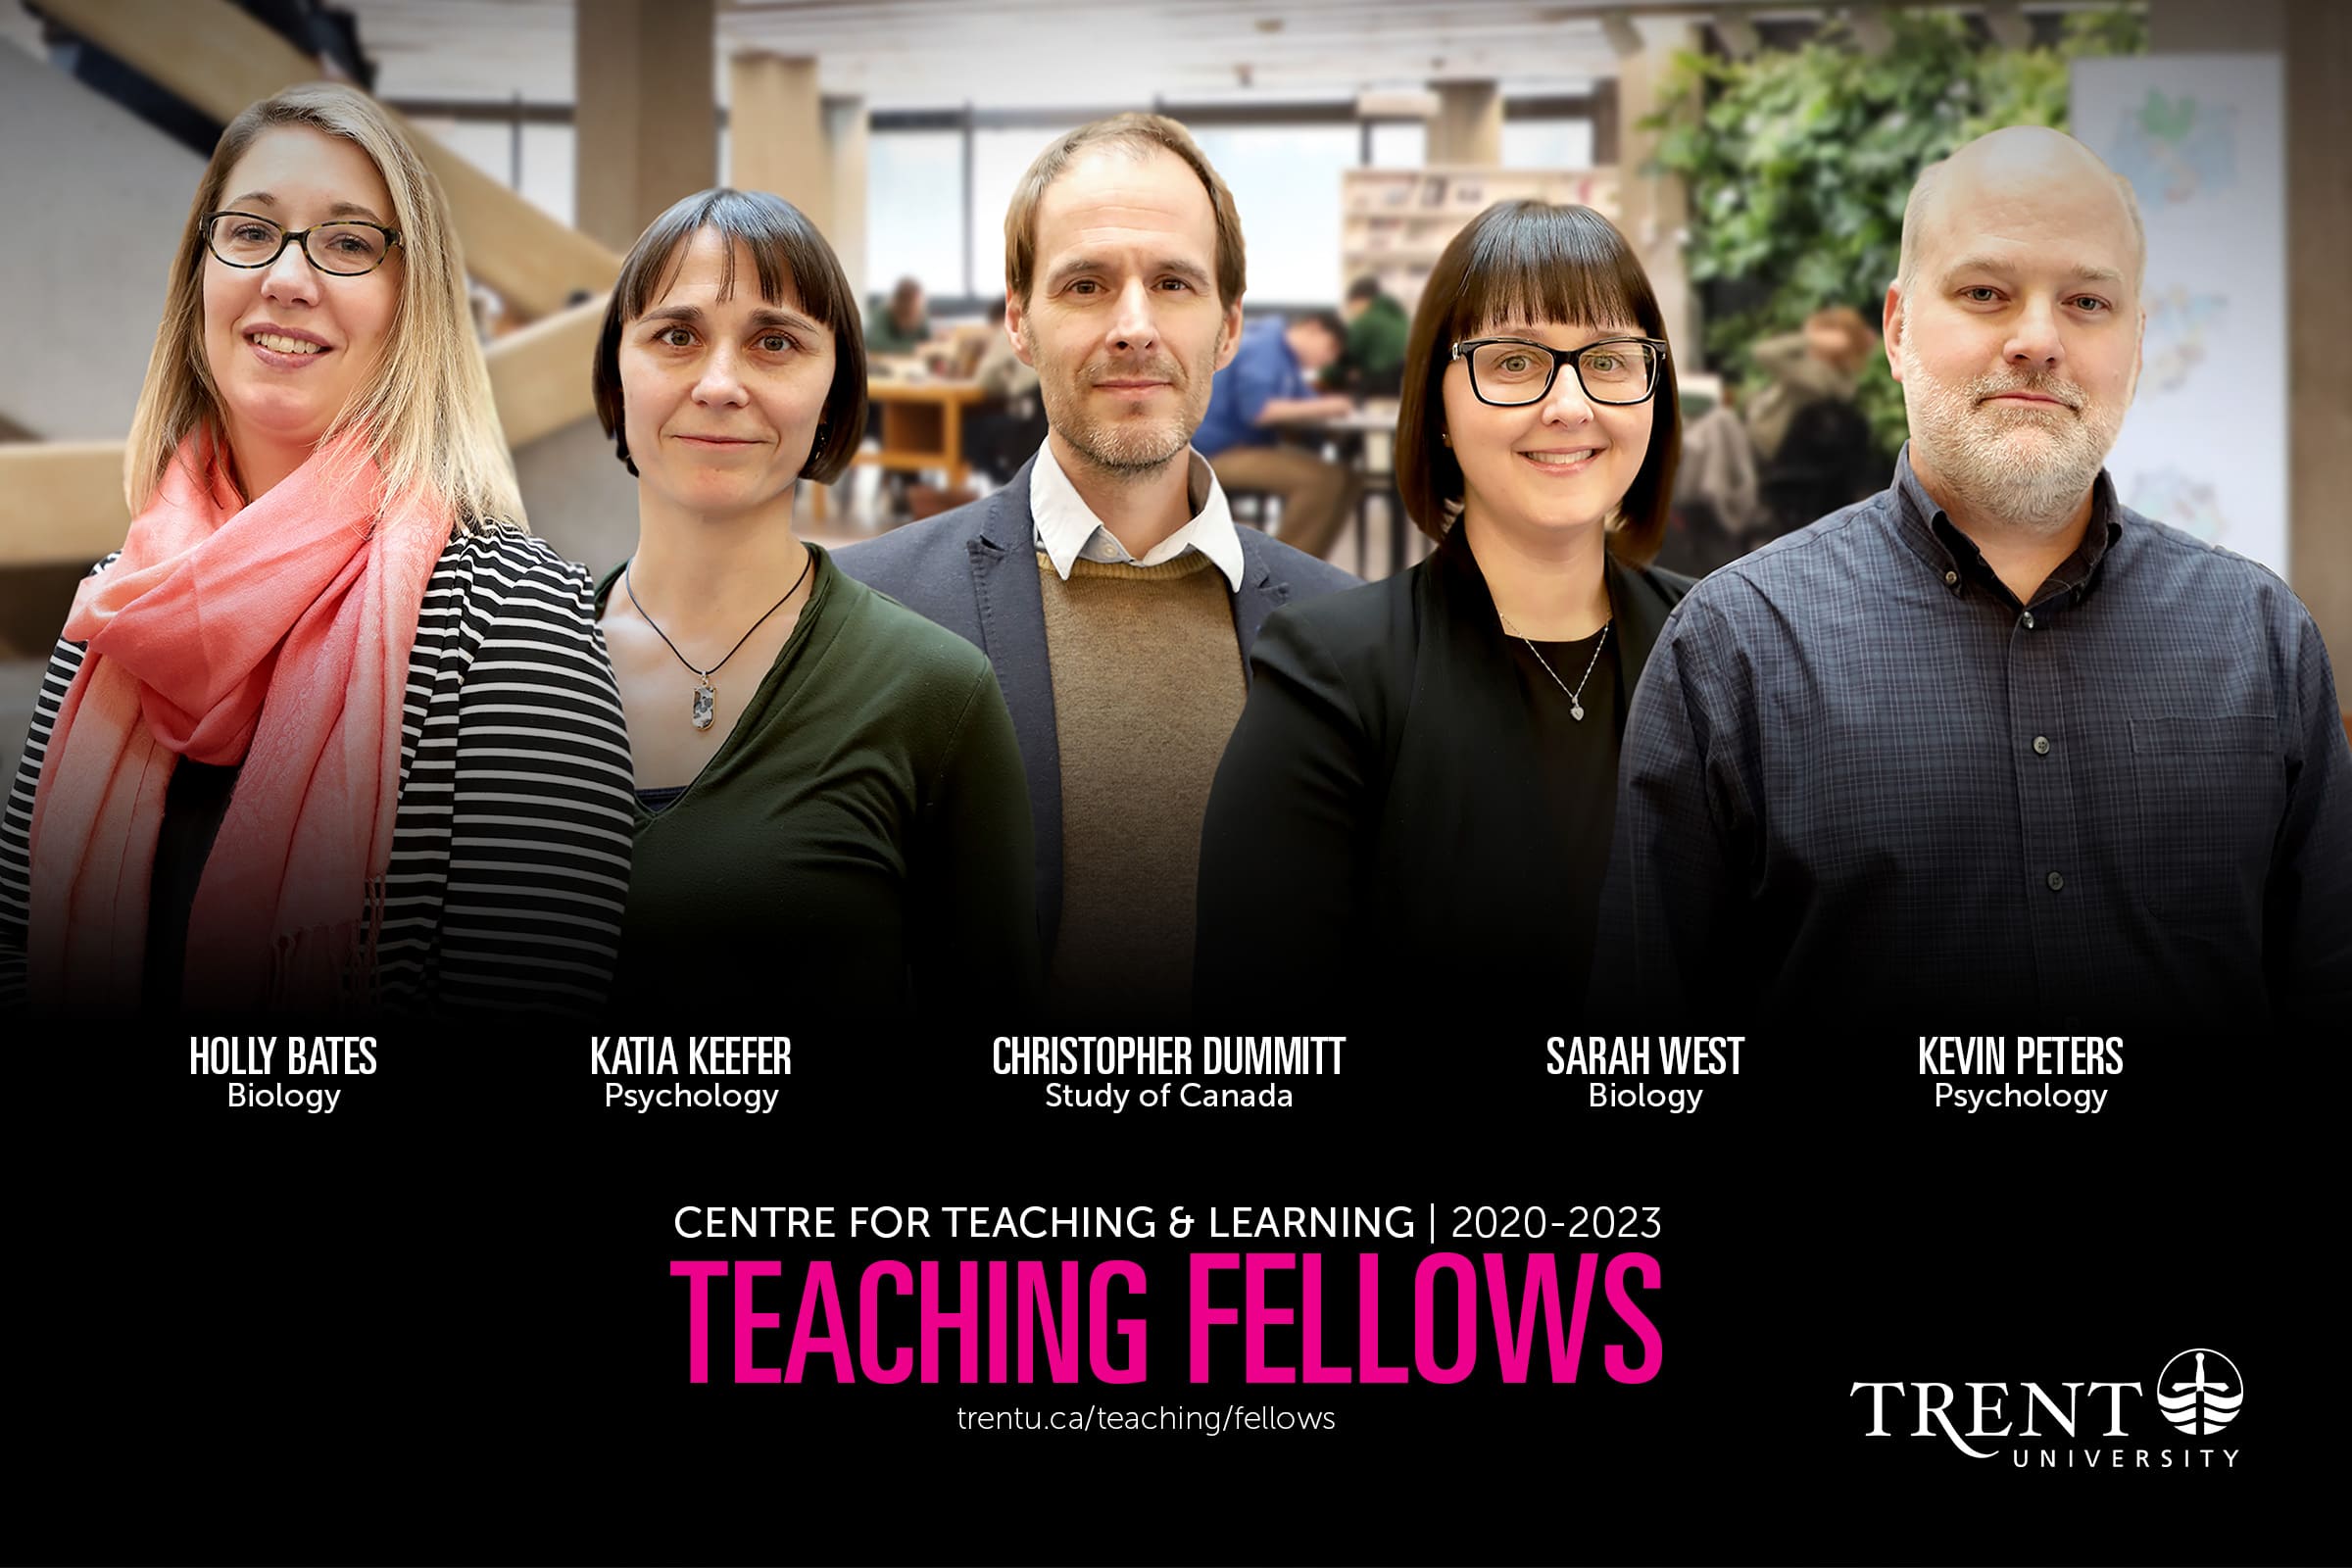 An image introducing our 2019-2022 Teaching Fellows. Holly Bates, Sarah West, Katia Keefer, Christopher Dummitt, Sarah West, and Kevin Peters.